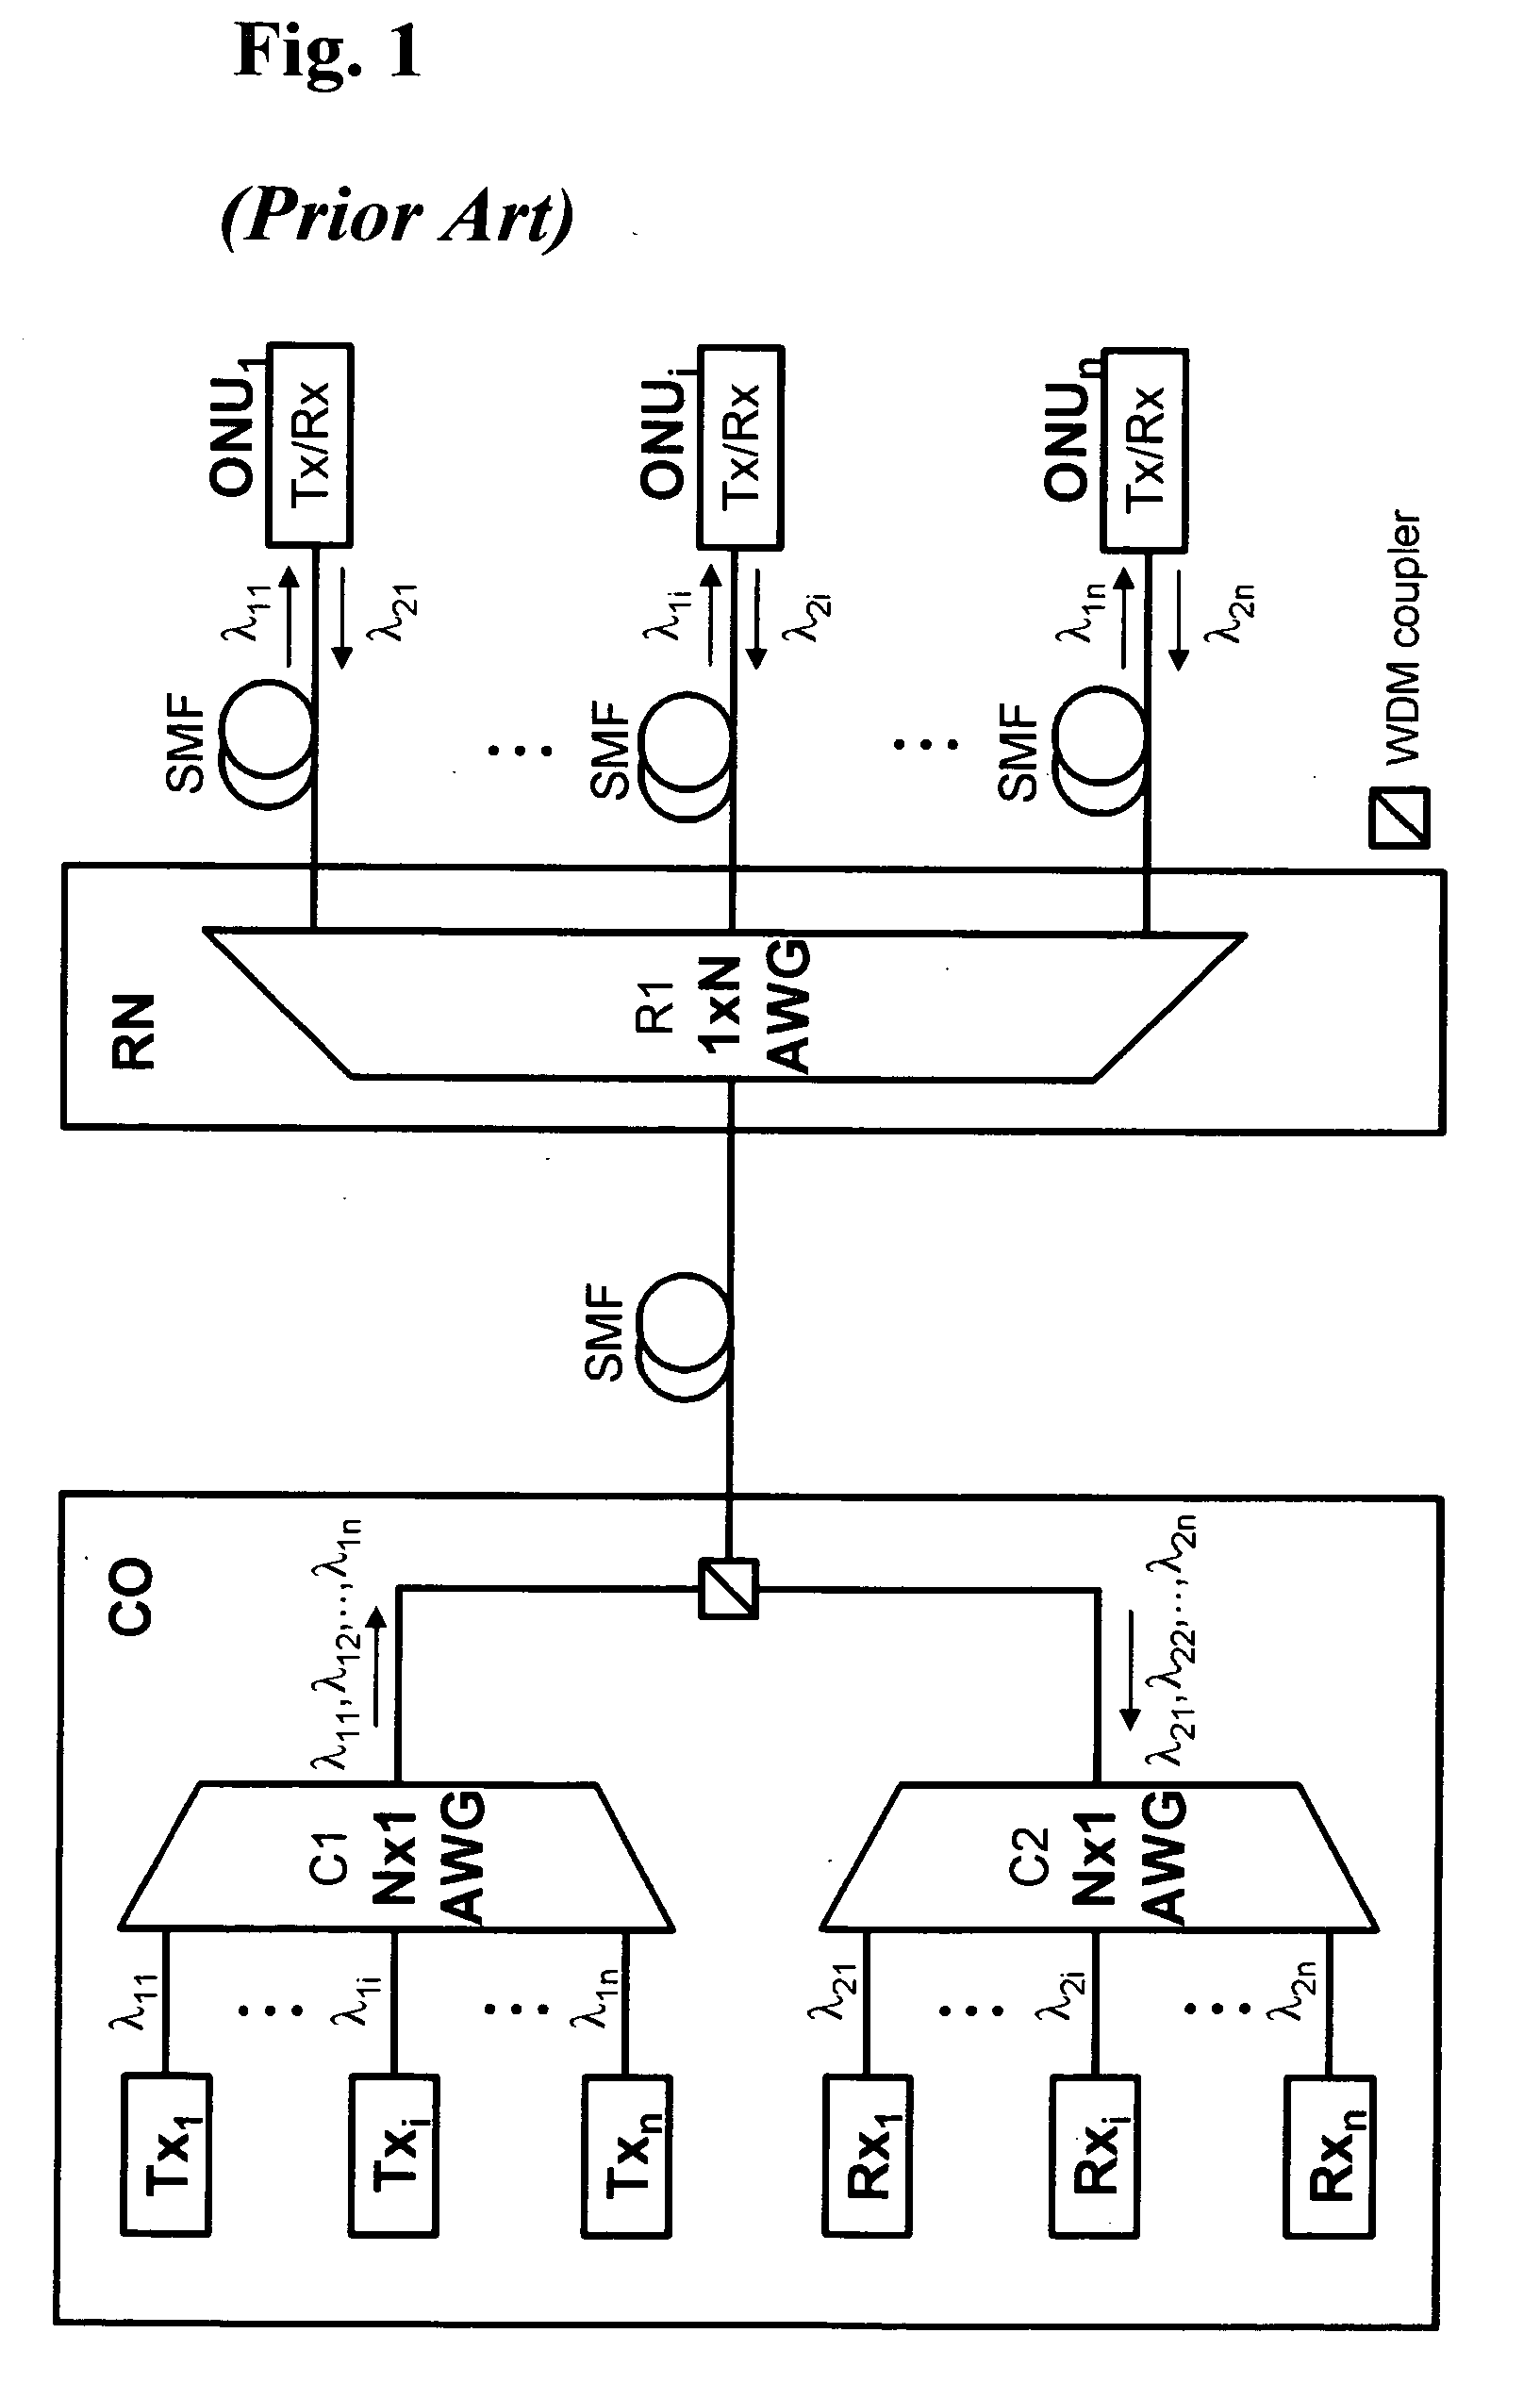 Fault localization apparatus for optical line in wavelength division multiplexed passive optical network